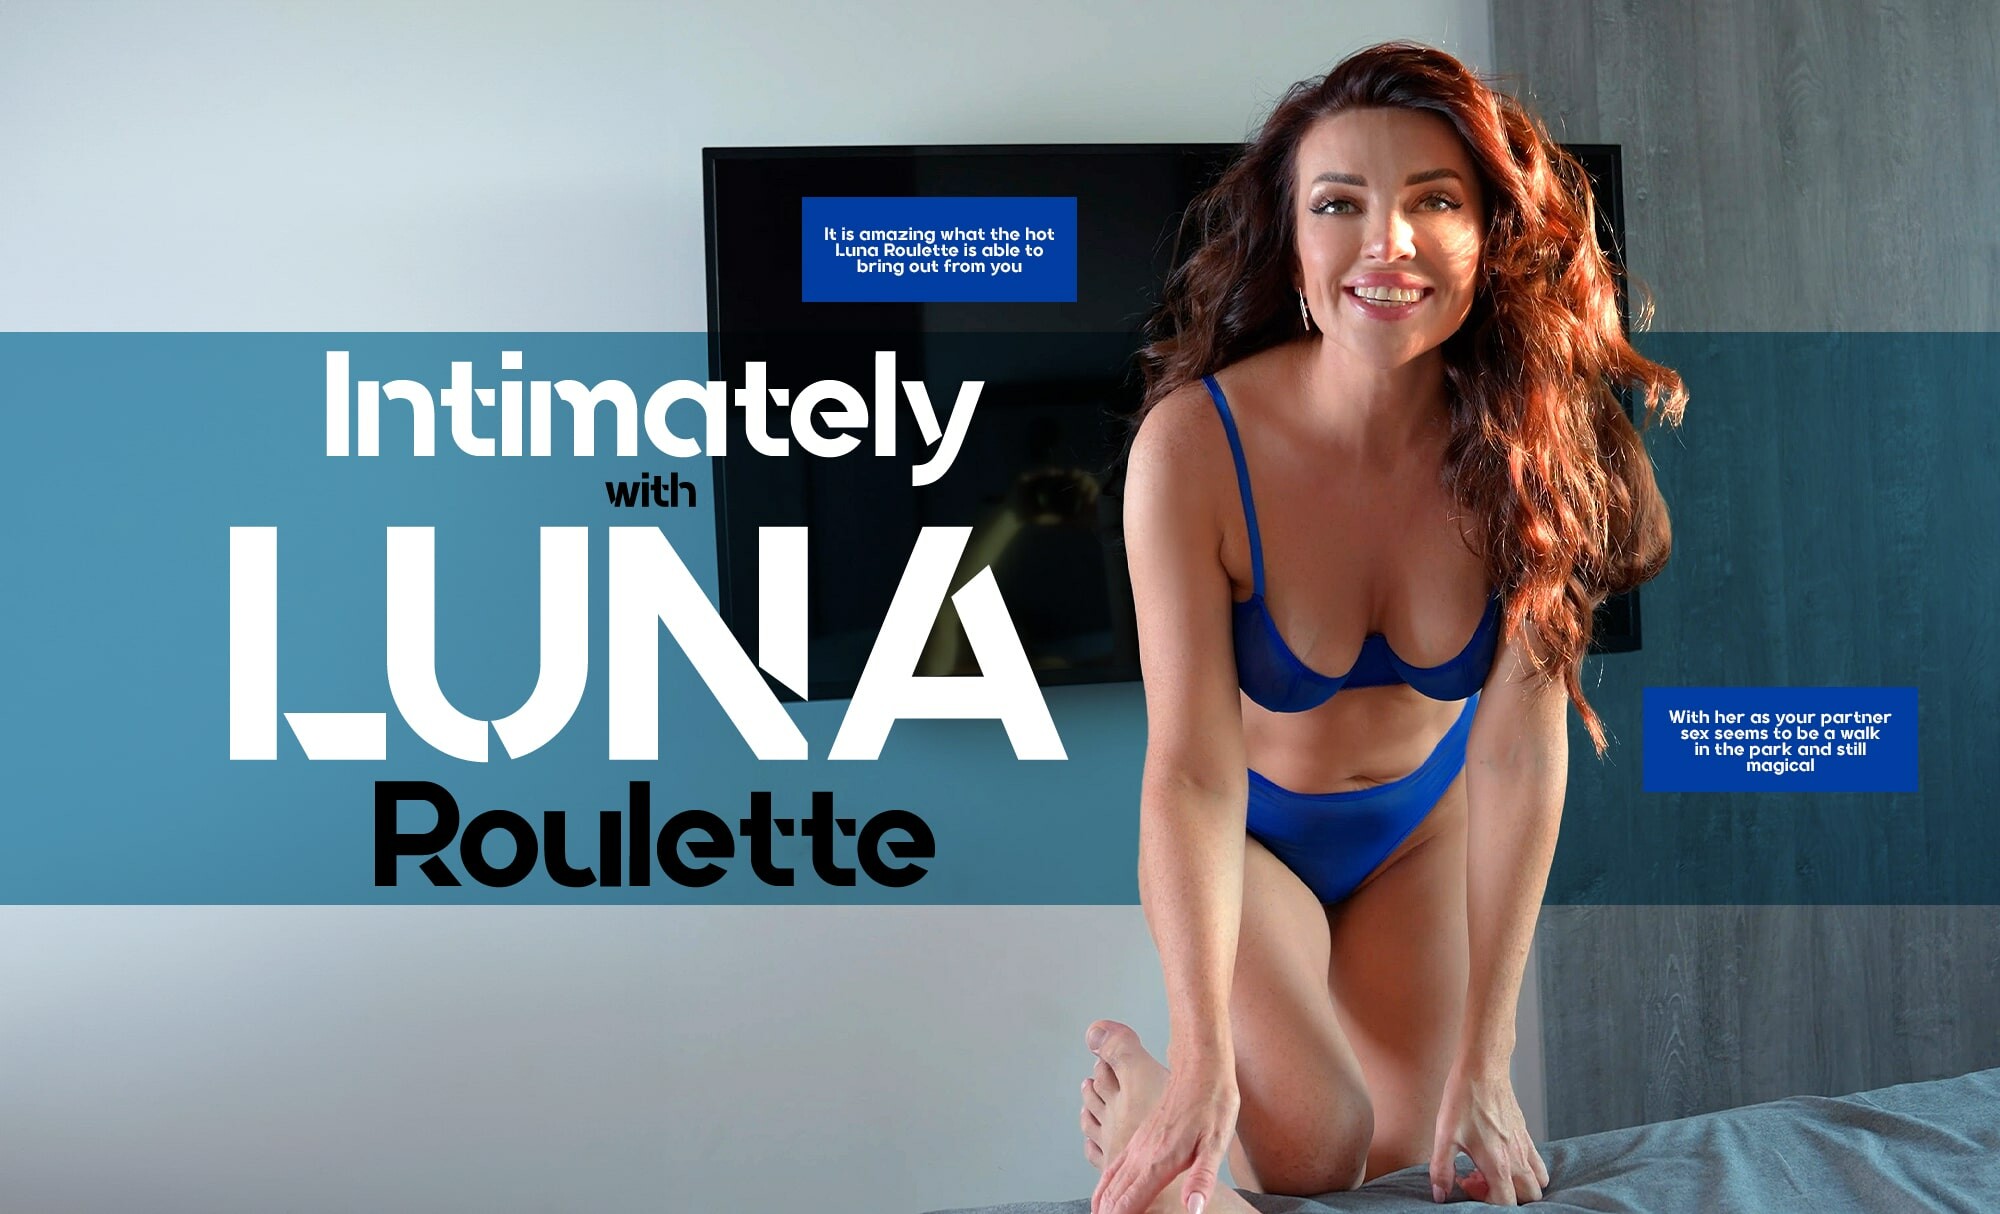 Luna Roulette “Intimately with Luna Roulette” LifeSelector